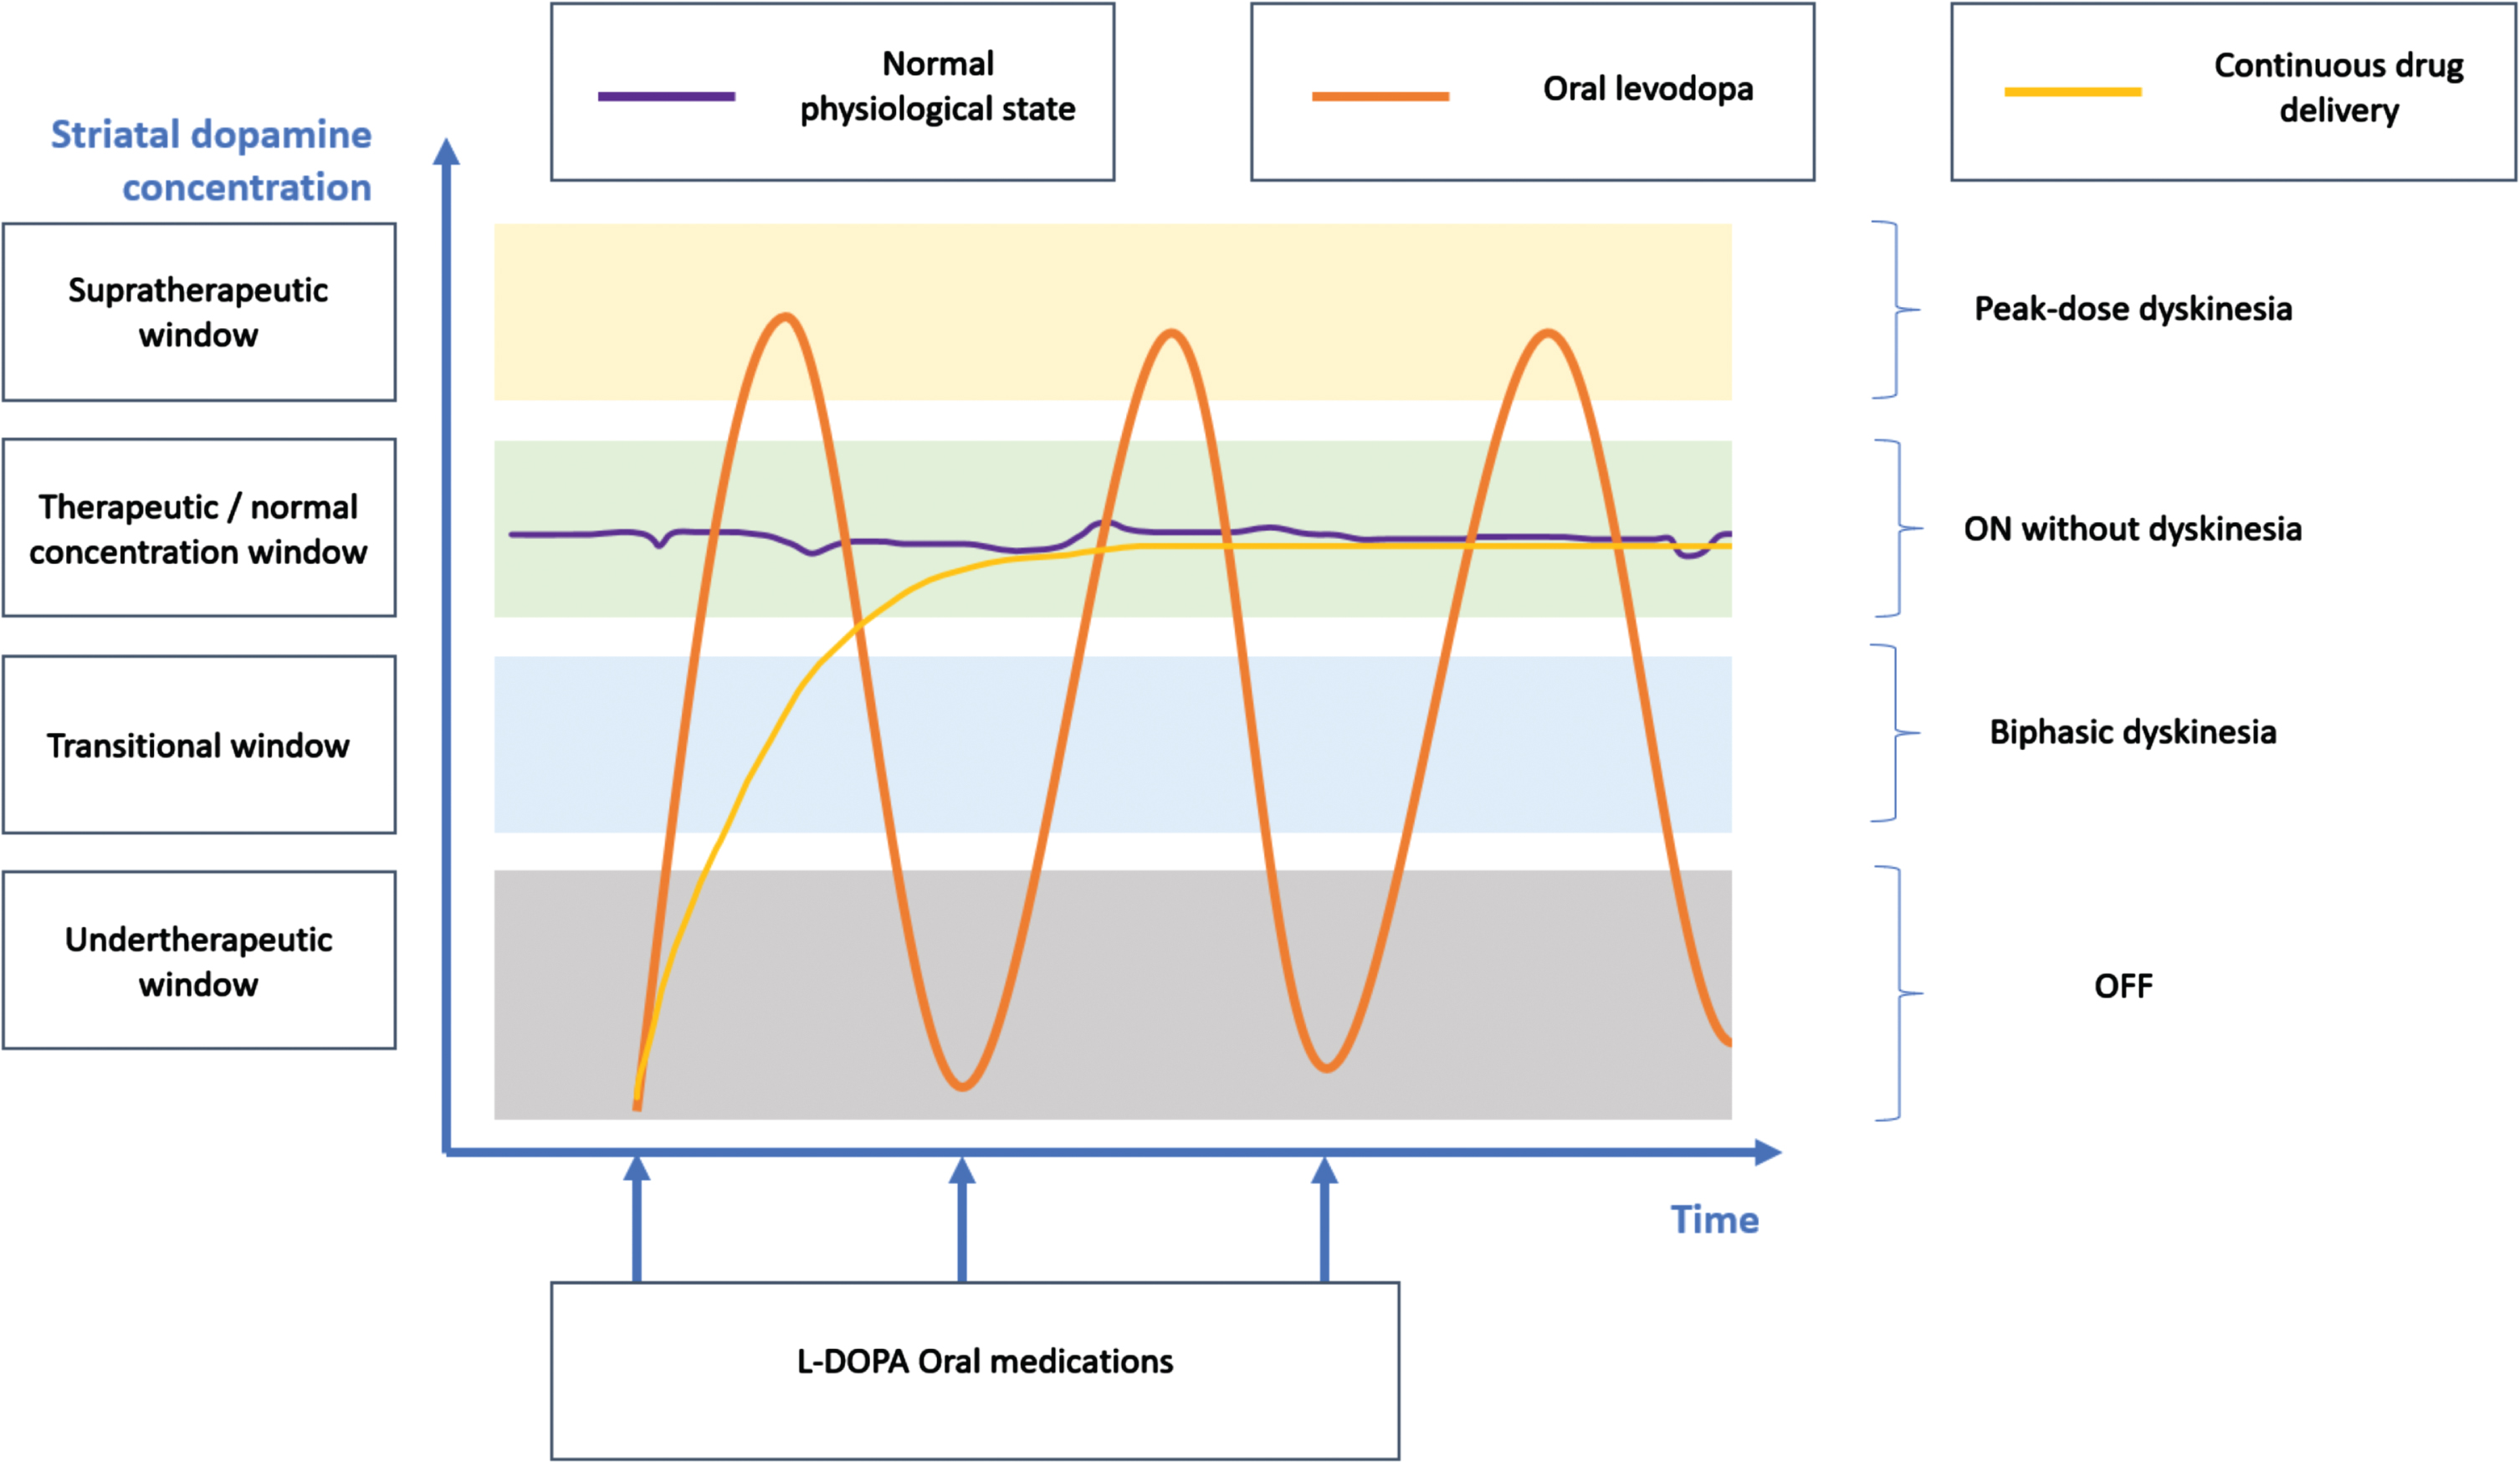 L-DOPA related complications as a function of the striatal dopamine concentration (i.e., reflecting the consequences of the pharmacokinetic and pharmacodynamic limitations). This diagram represents a patient’s diurnal period with regular medication intake.